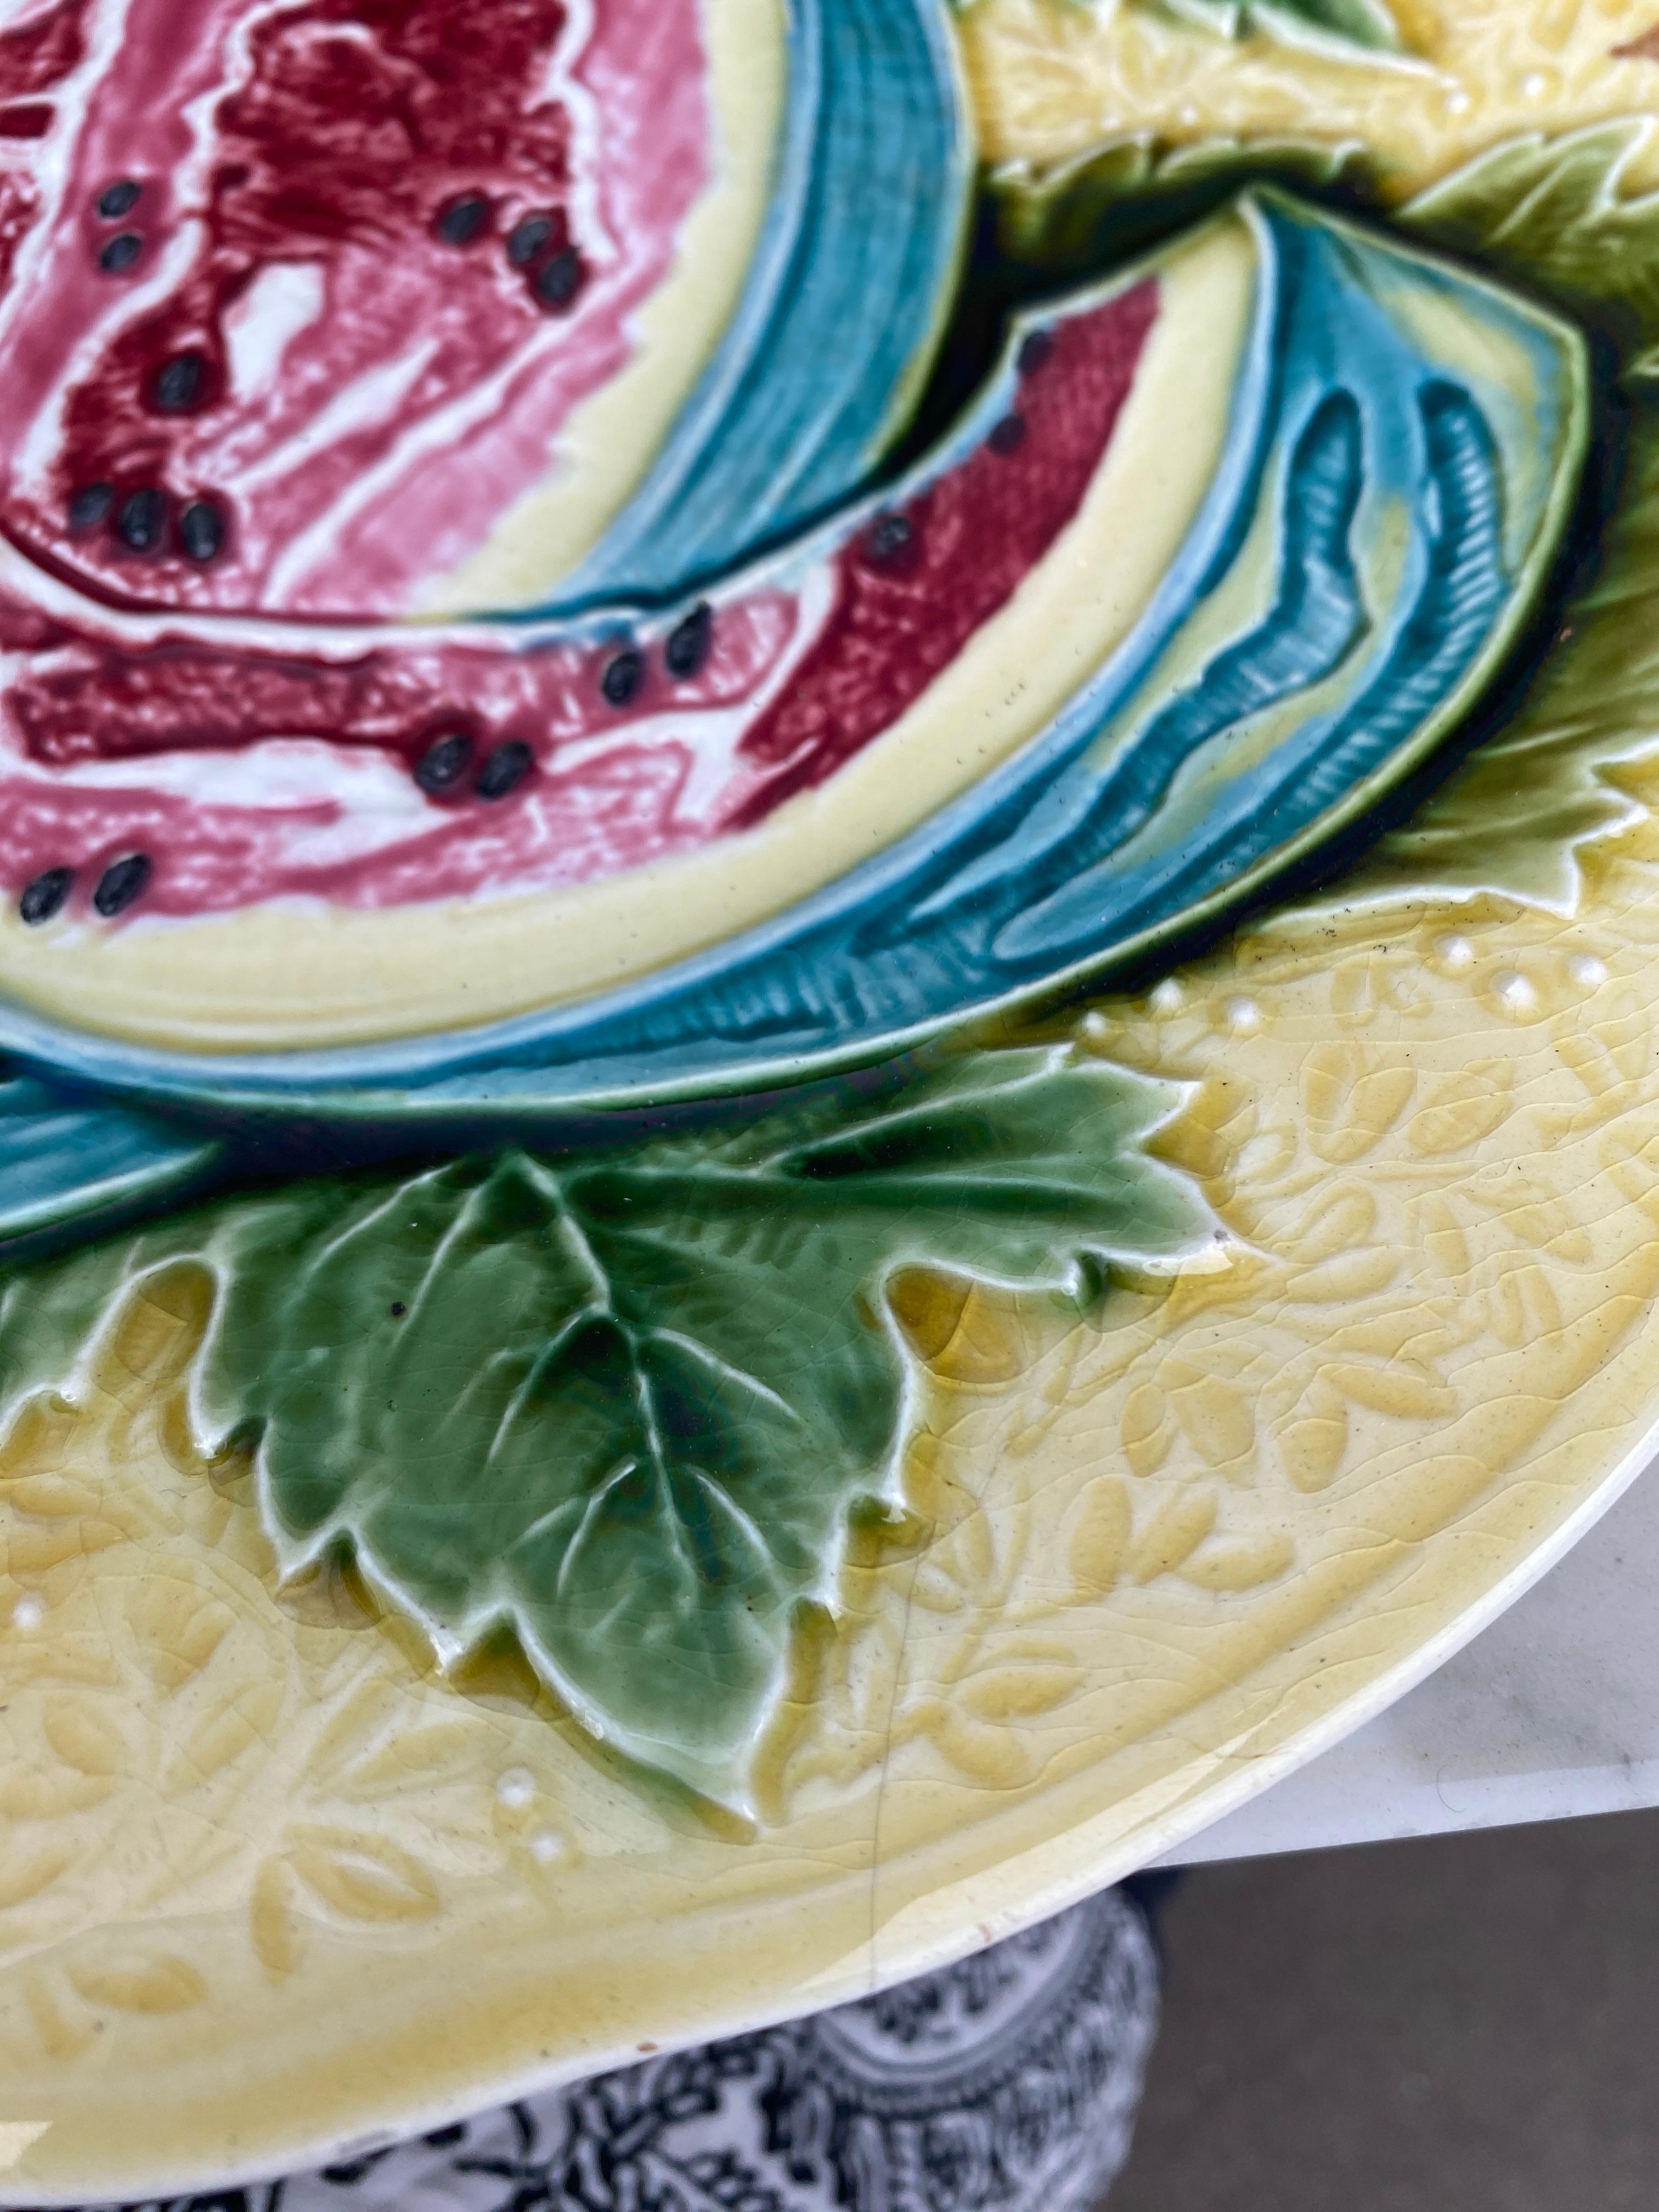 Faience Rare Large 19th Century Majolica Melon Platter For Sale